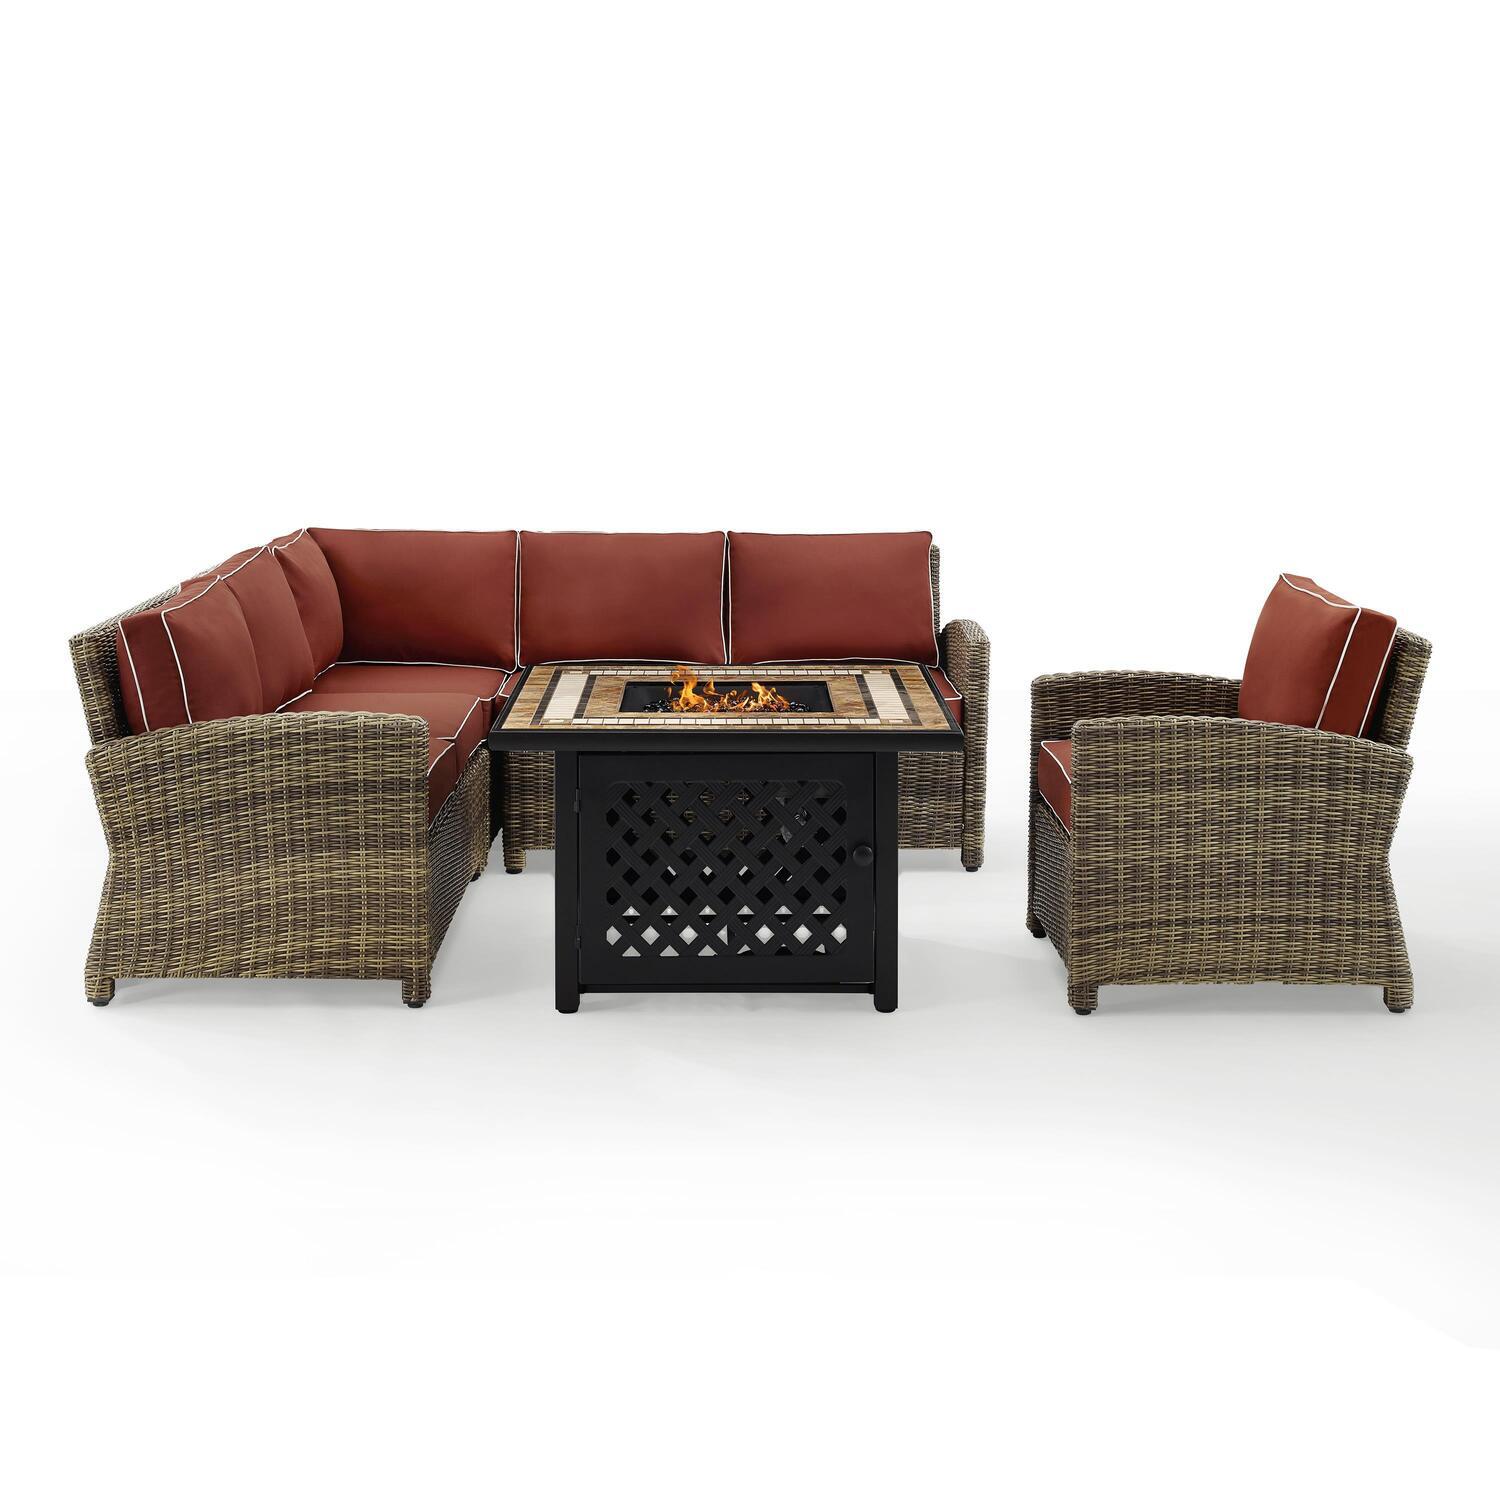 Bradenton 5Pc Outdoor Wicker Sectional Set W/Fire Table Weathered Brown/Sangria - Right Corner Loveseat, Left Corner Loveseat, Corner Chair, Armchair, & Tucson Fire Table - image 1 of 9